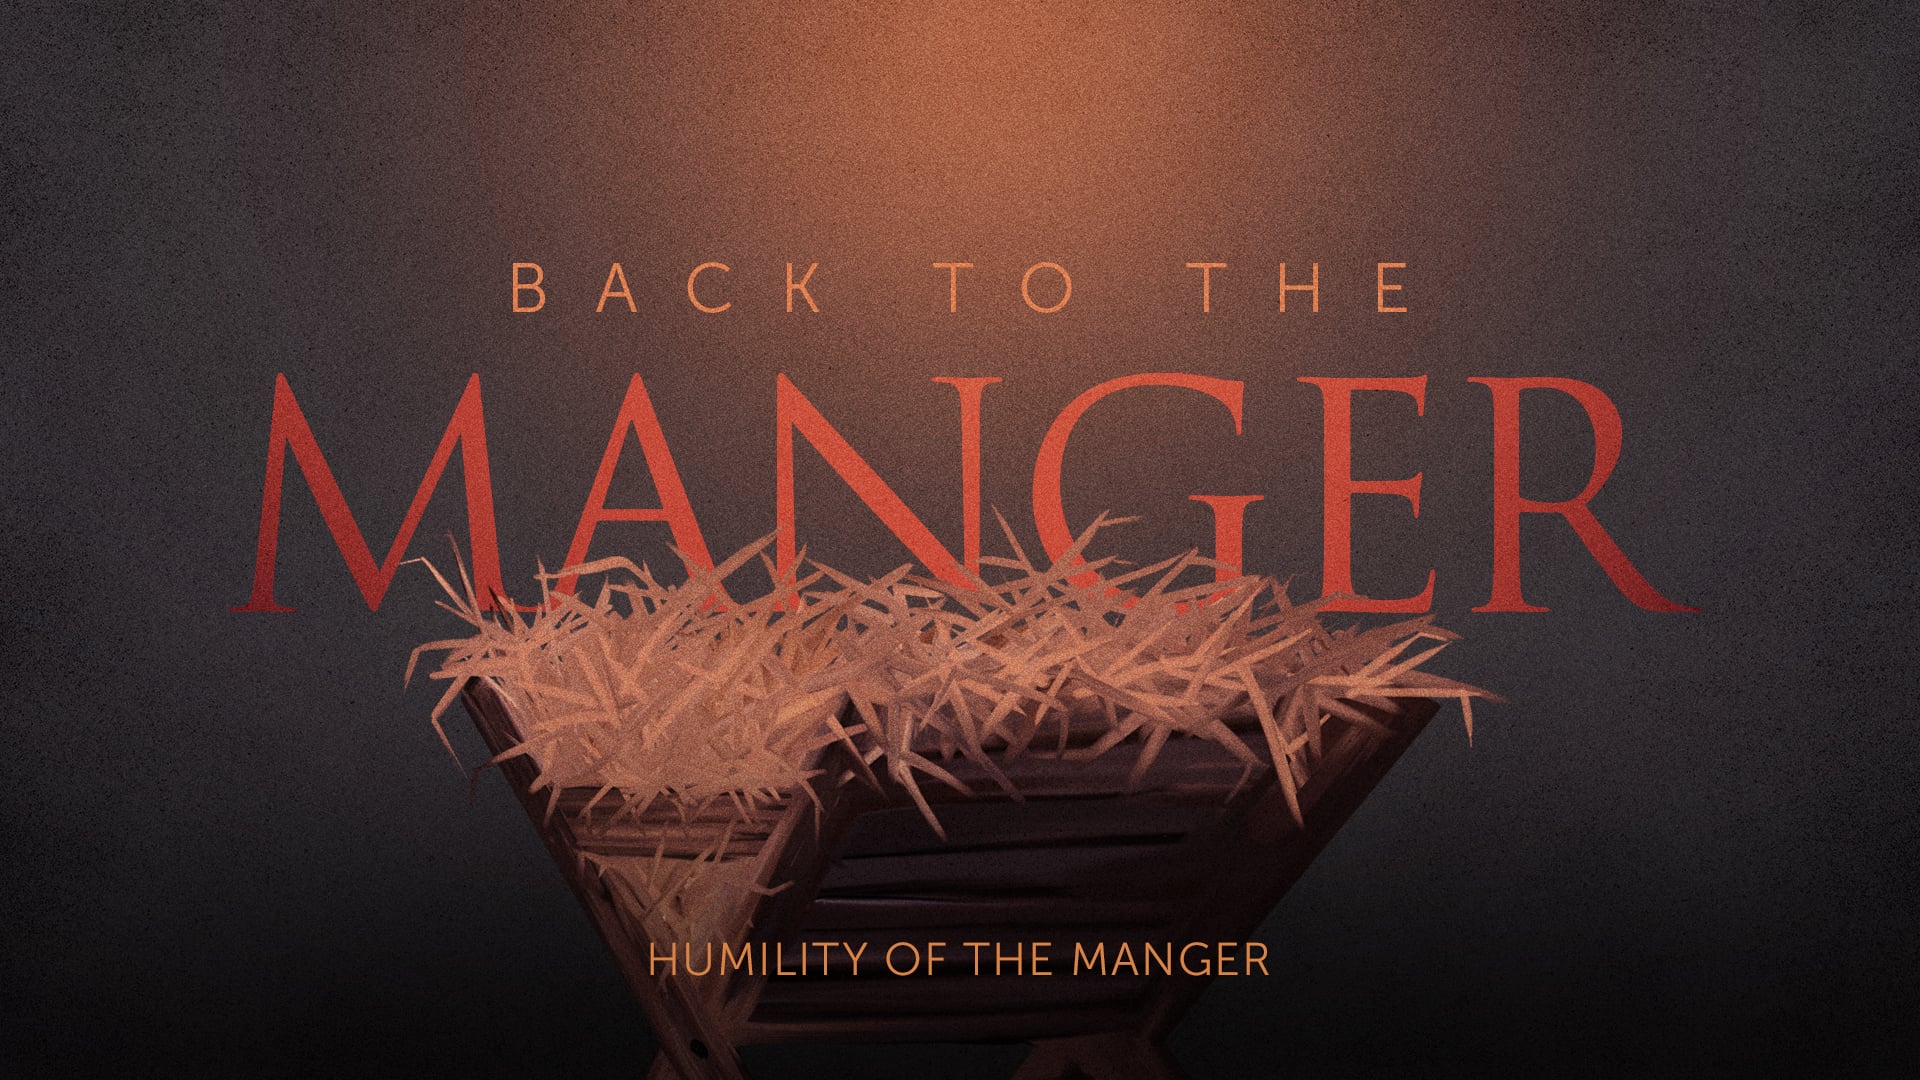 Humility of the Manger